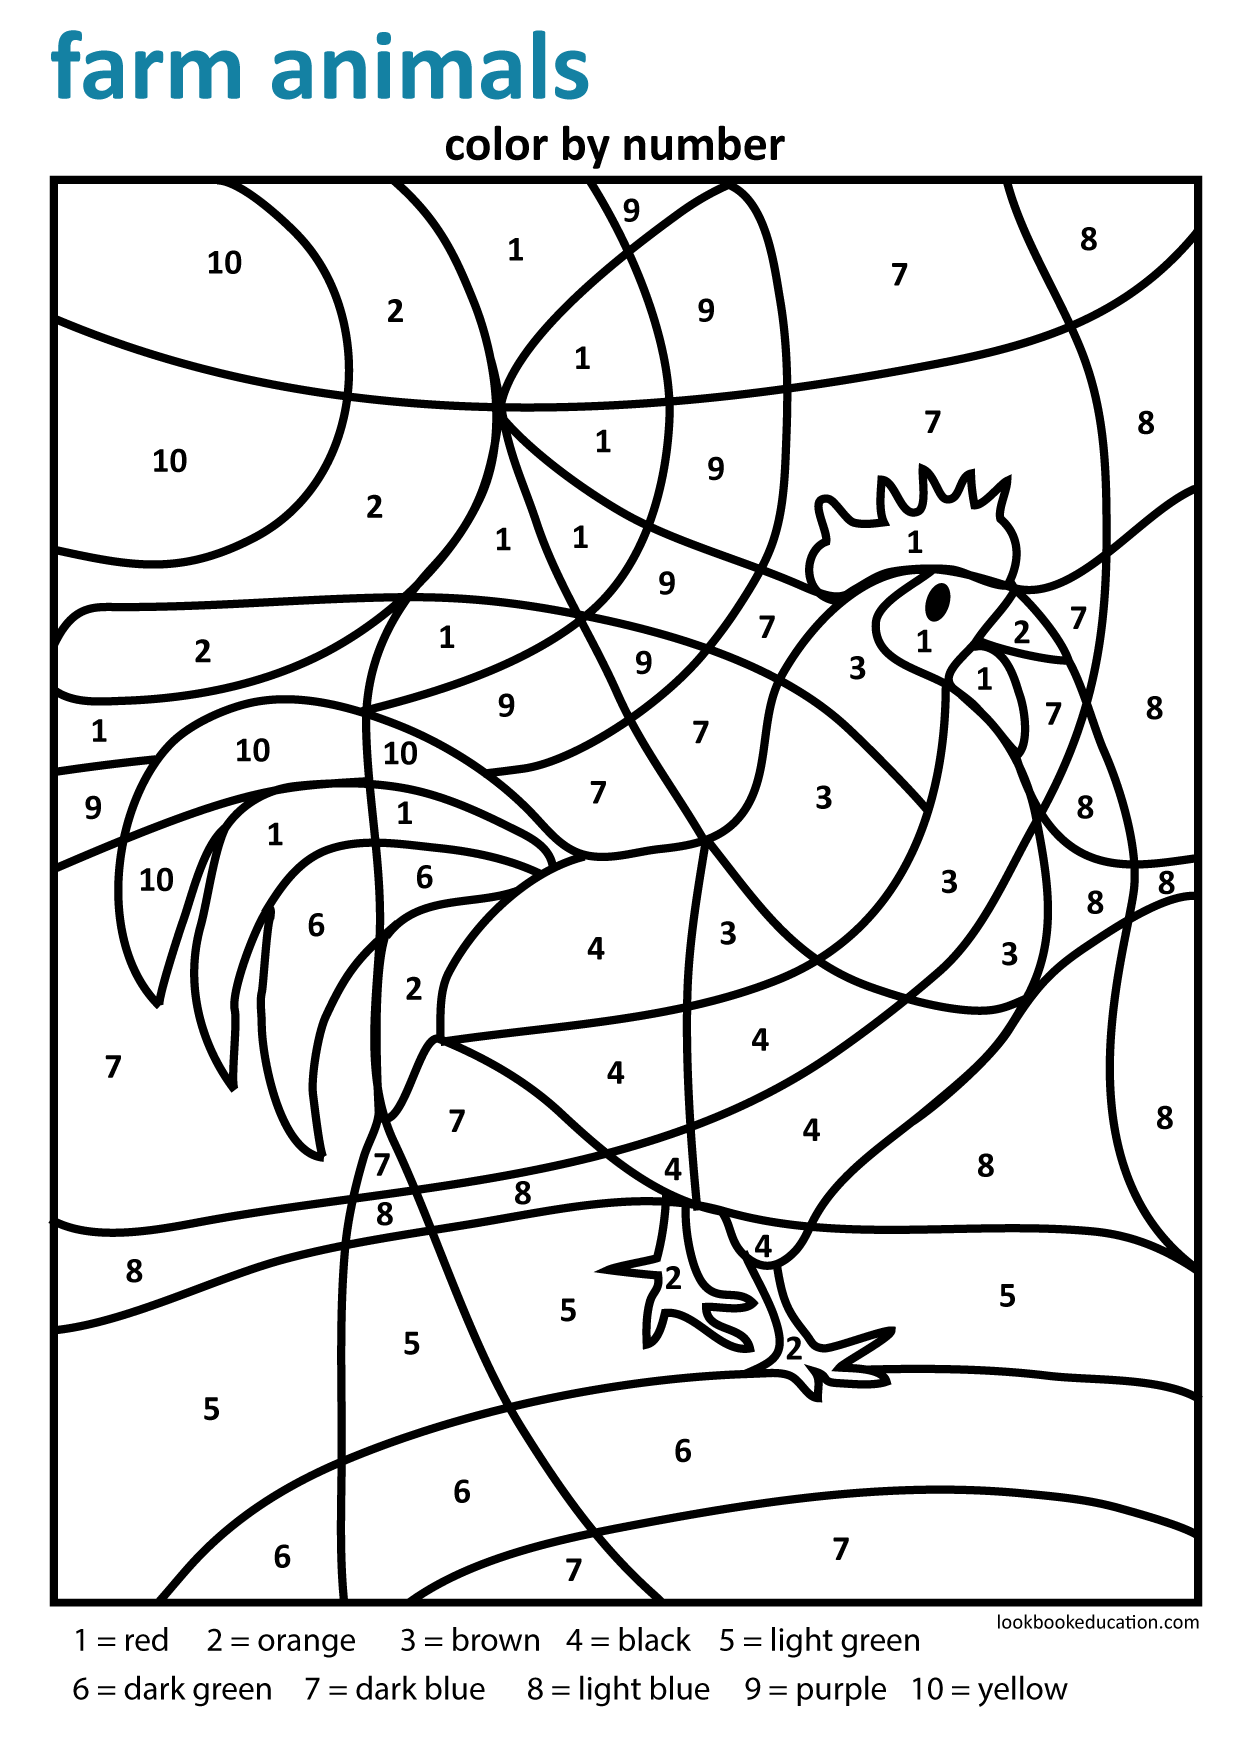 Worksheet Color by Number Farm Animals   LookbookEducation.com